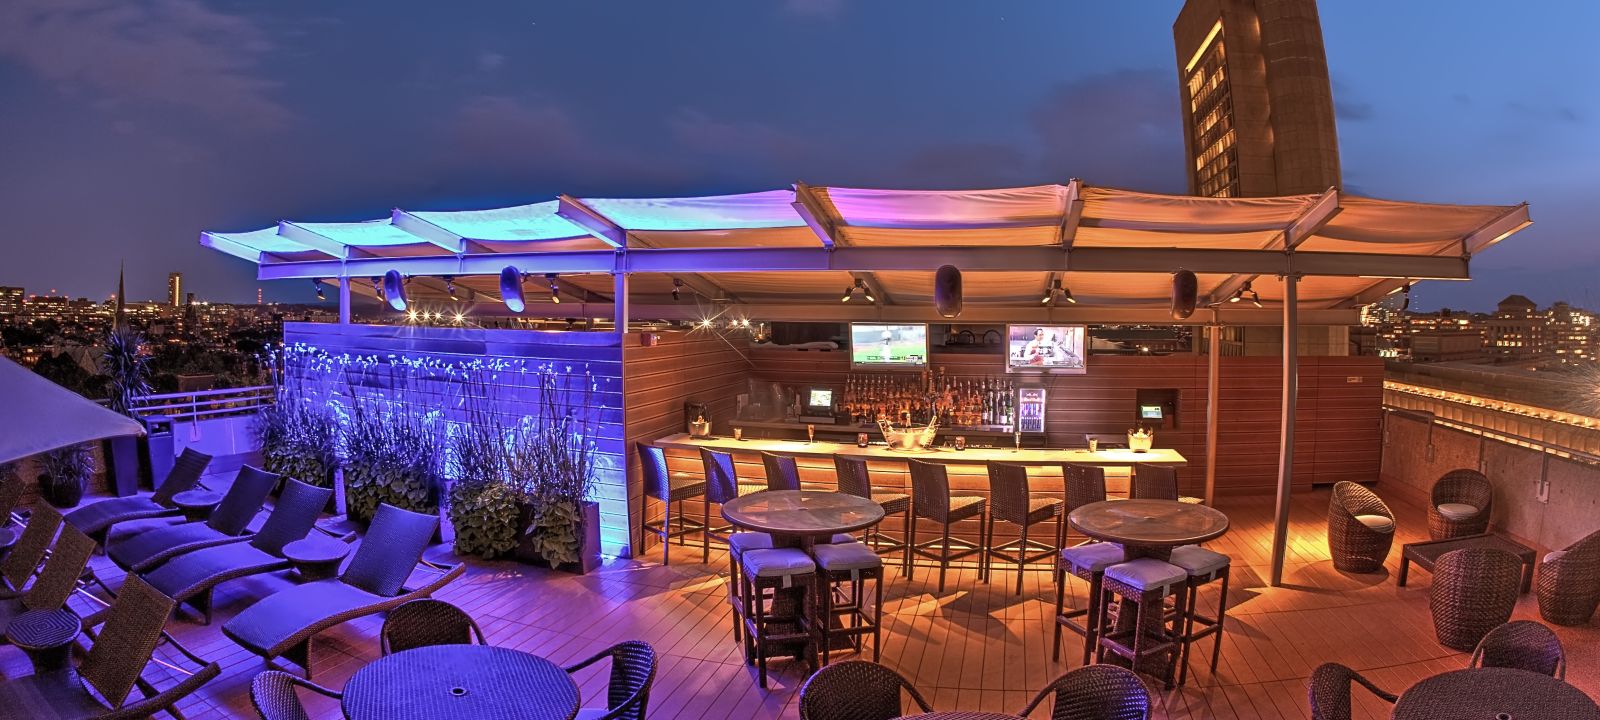 The Colonnade hotel with rooftop bar in Boston along with tables and chairs at night